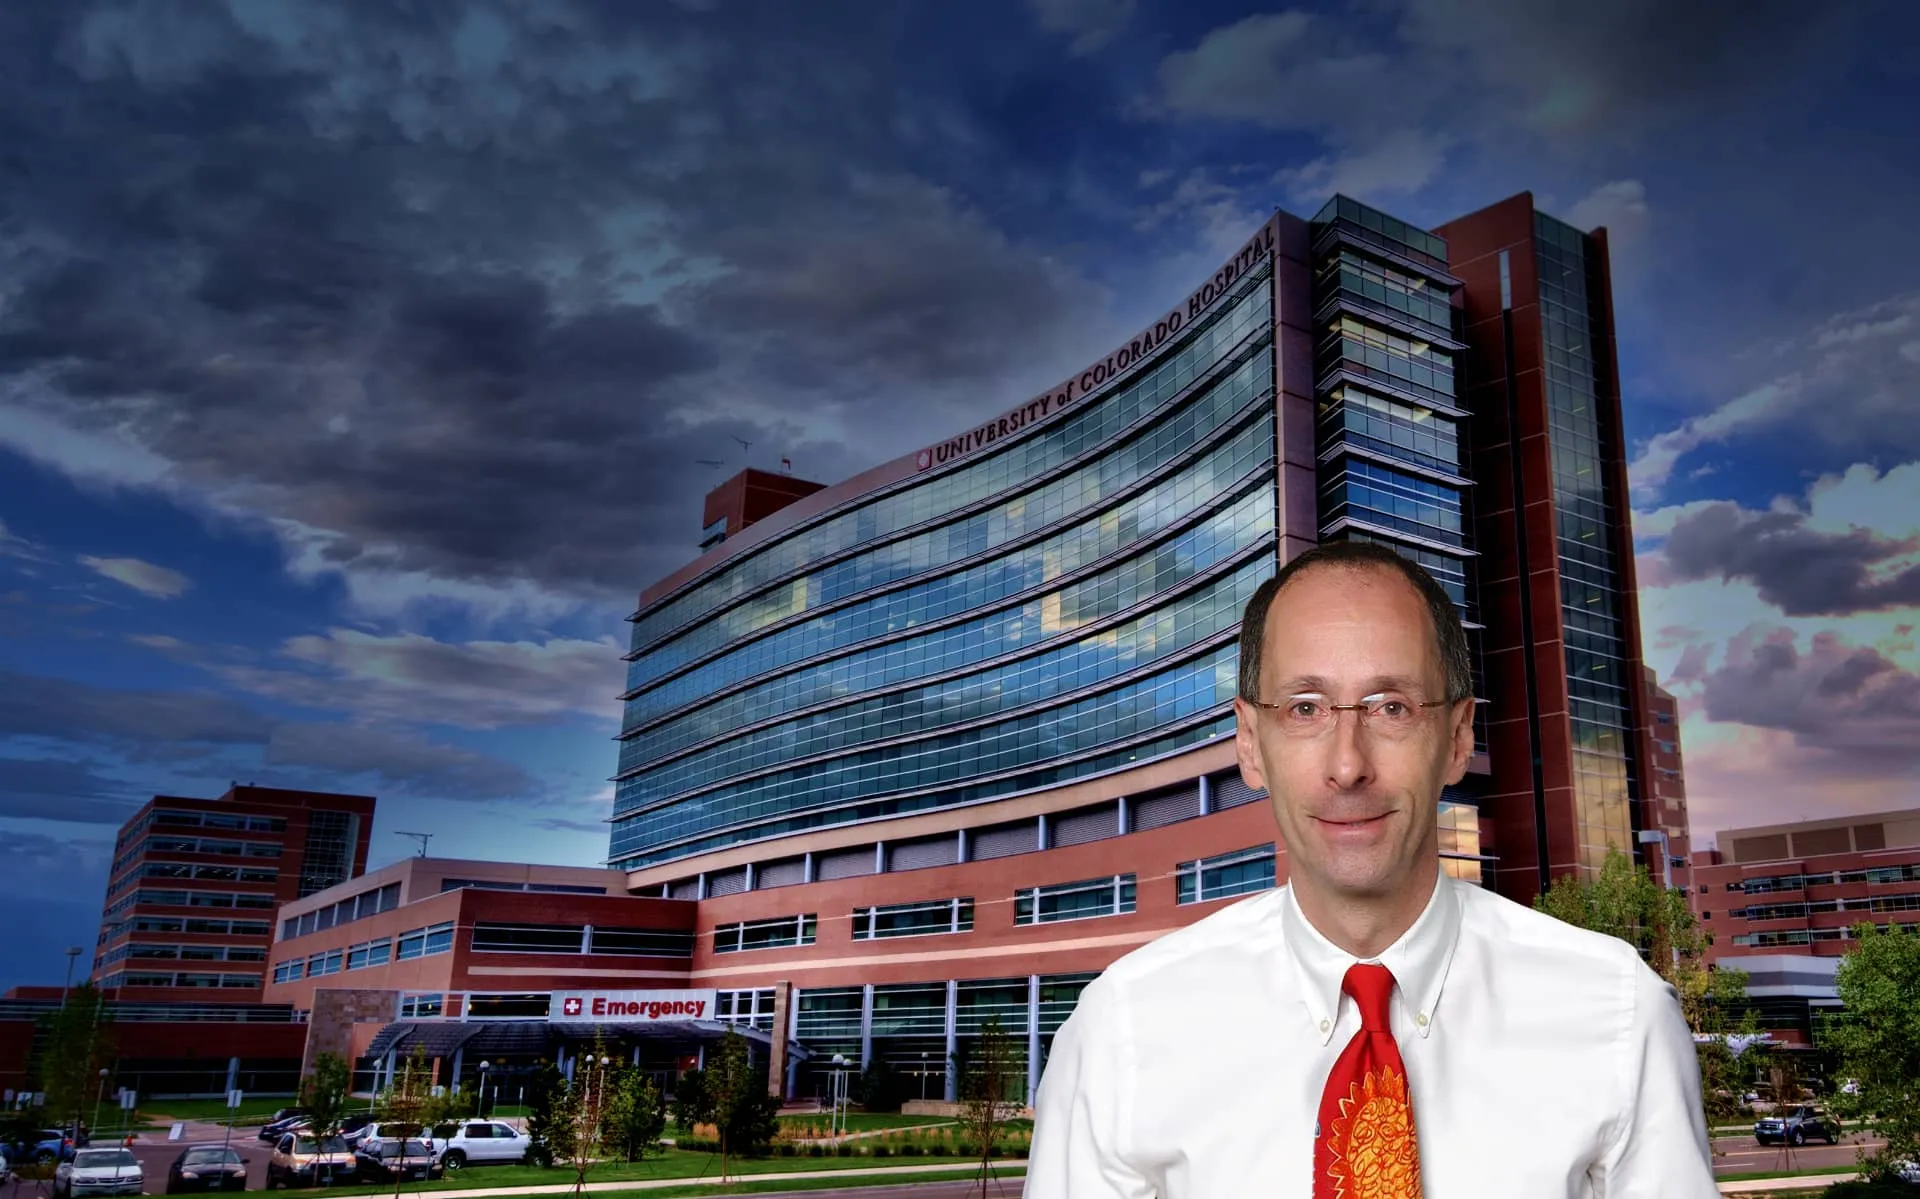 Dr. Peter Sachs standing in front of University of Colorado Hospital